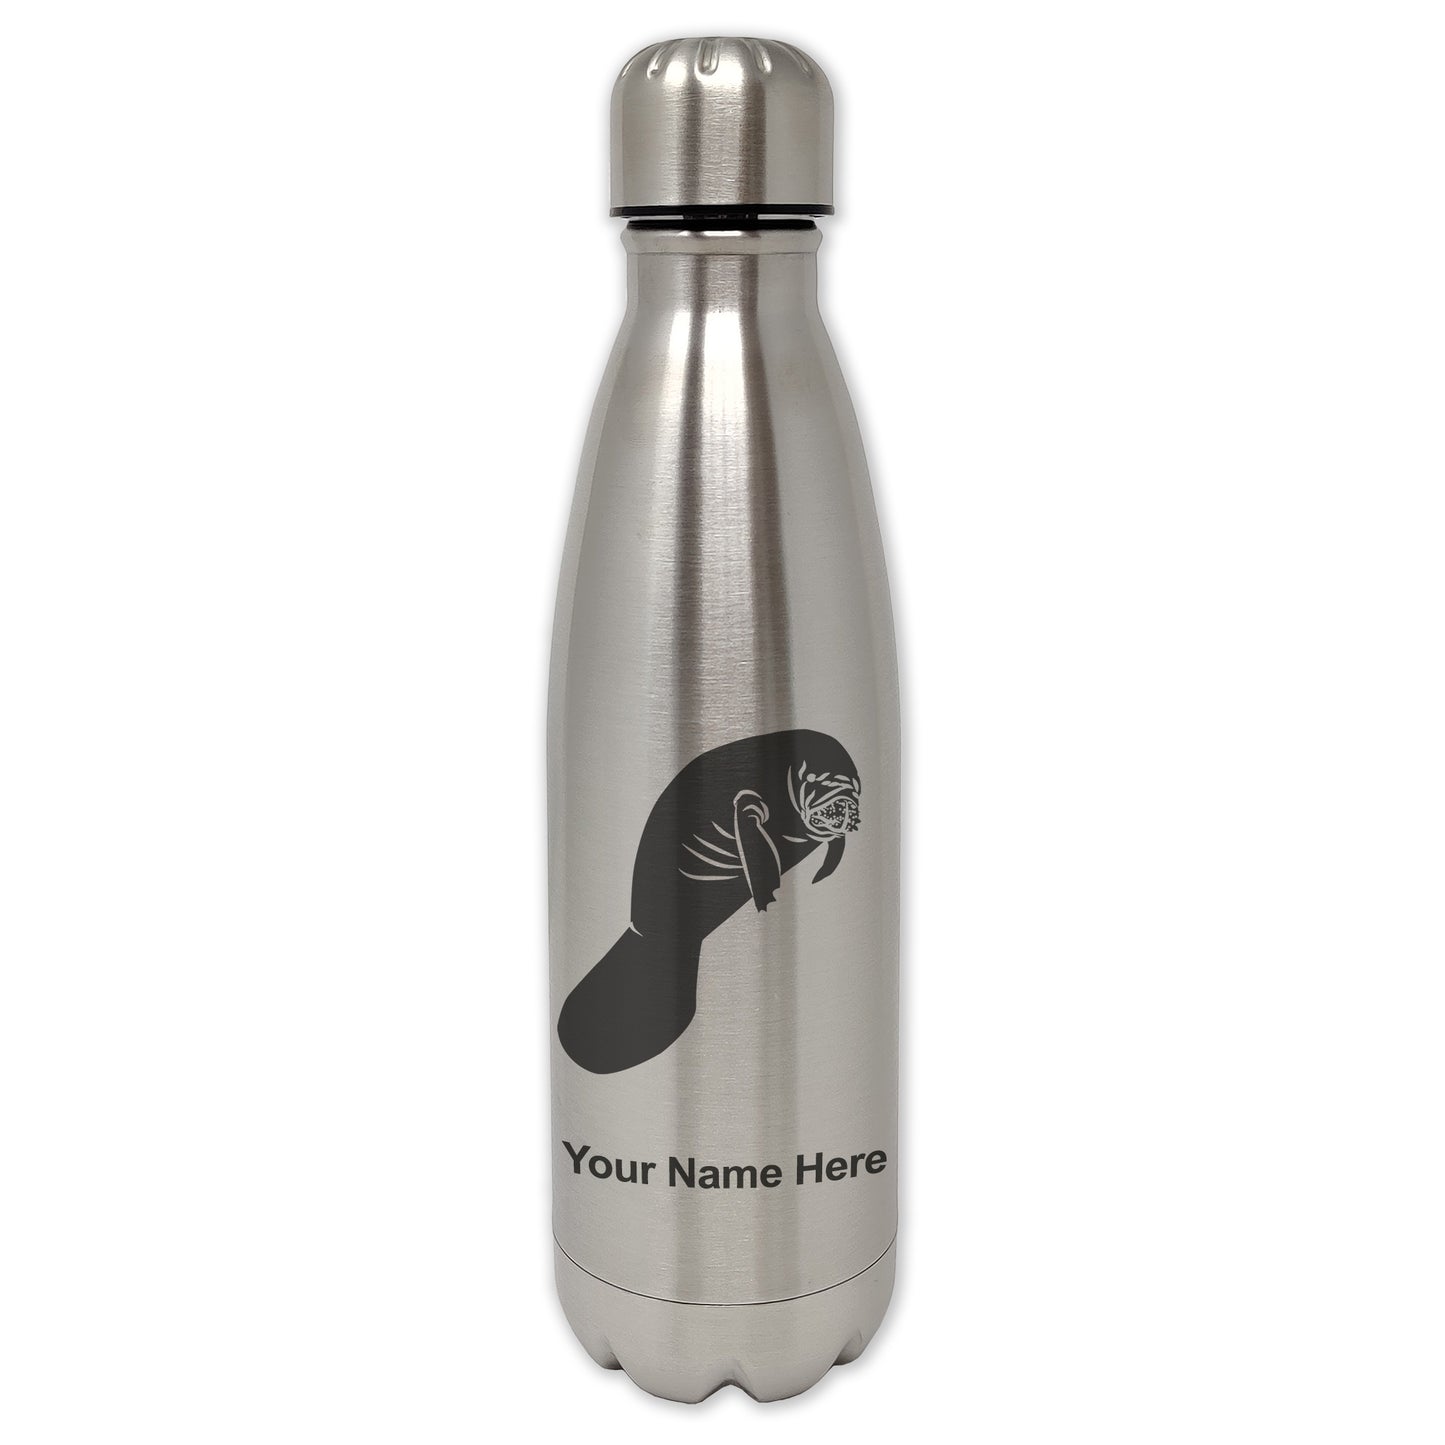 LaserGram Single Wall Water Bottle, Manatee, Personalized Engraving Included